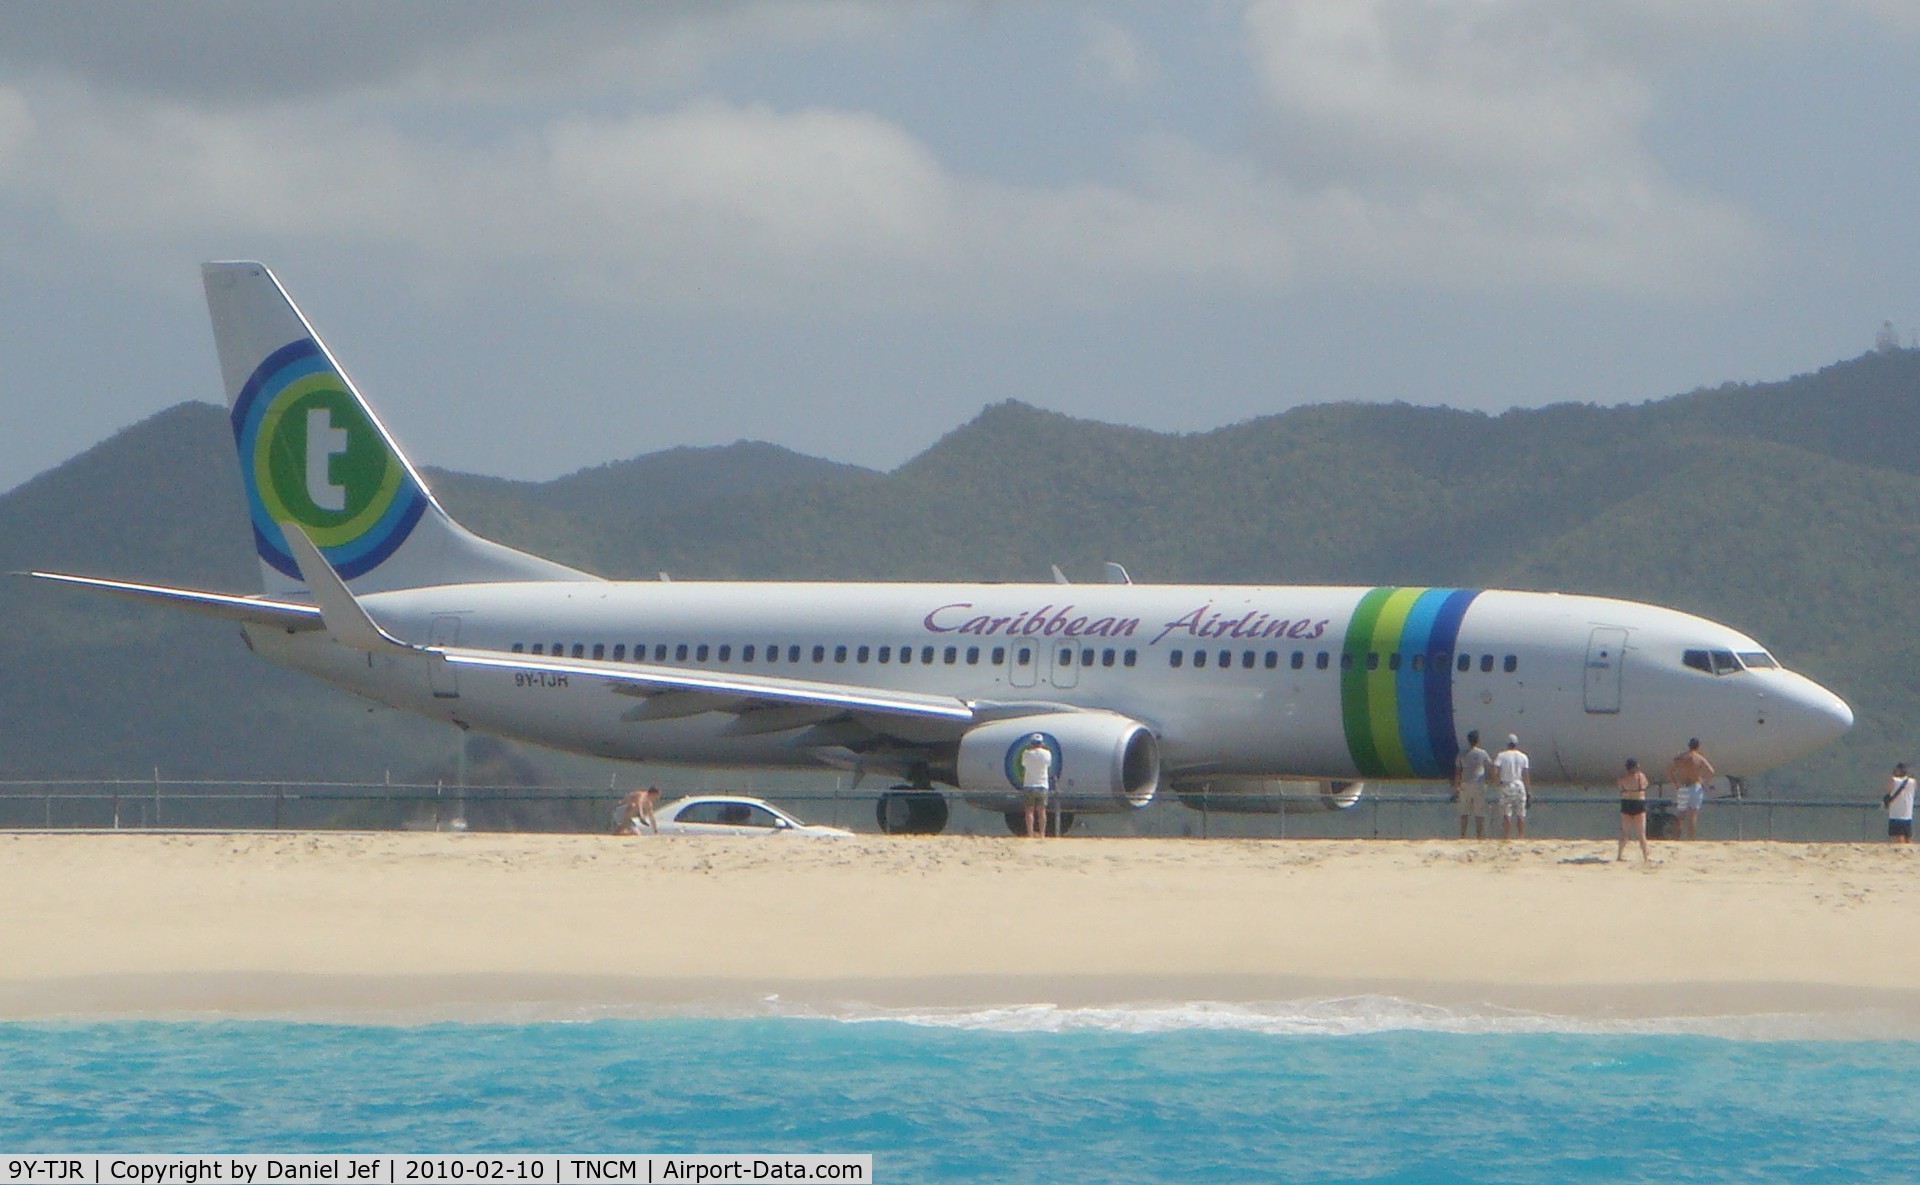 9Y-TJR, 2009 Boeing 737-8K2 C/N 37160, Carribean airlines 9Y-TRJ at the tresh hold for departure TNCM